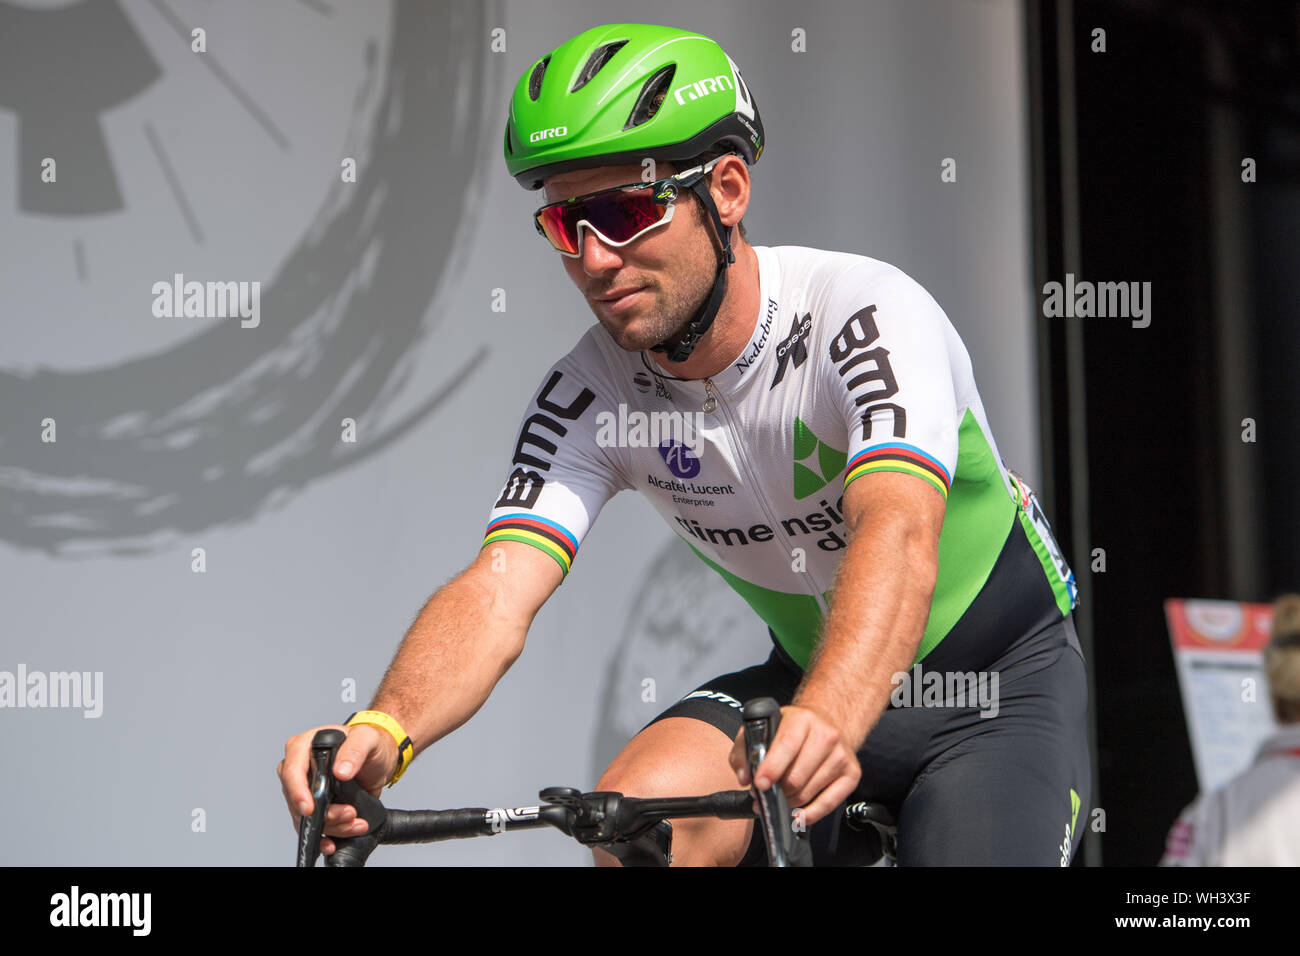 Mark CAVENDISH (Team Dimension Data), enrollment, half figure, half figure,  2nd stage, Marburg (GER) - Goettingen (GER), start in Marburg/Germany on  30.08.2019. Germany Tour 2019 from 29.08.- 01.09.2019 in Germany. | Usage  worldwide Stock Photo - Alamy